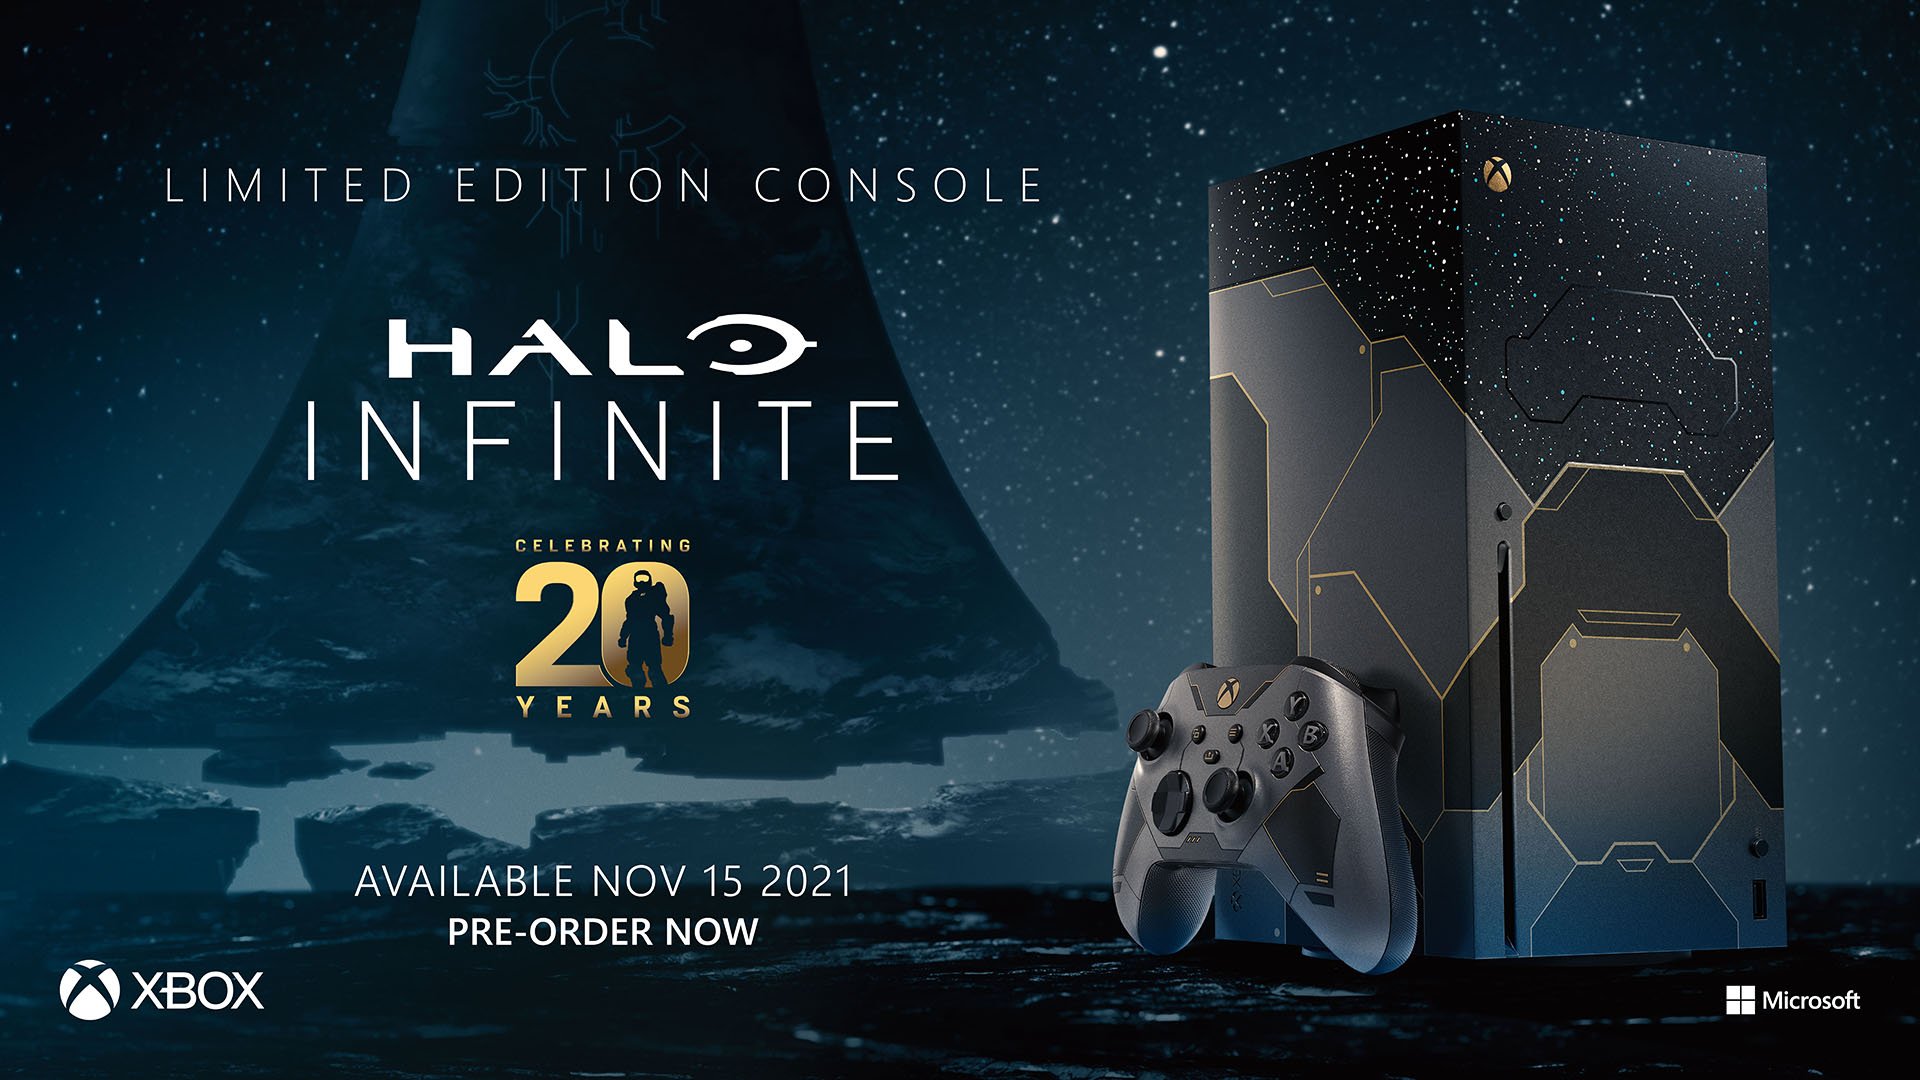 Best Buy Begins Selling 'Halo Infinite' Special-Edition Xbox Series X Video  Game Console - Media Play News